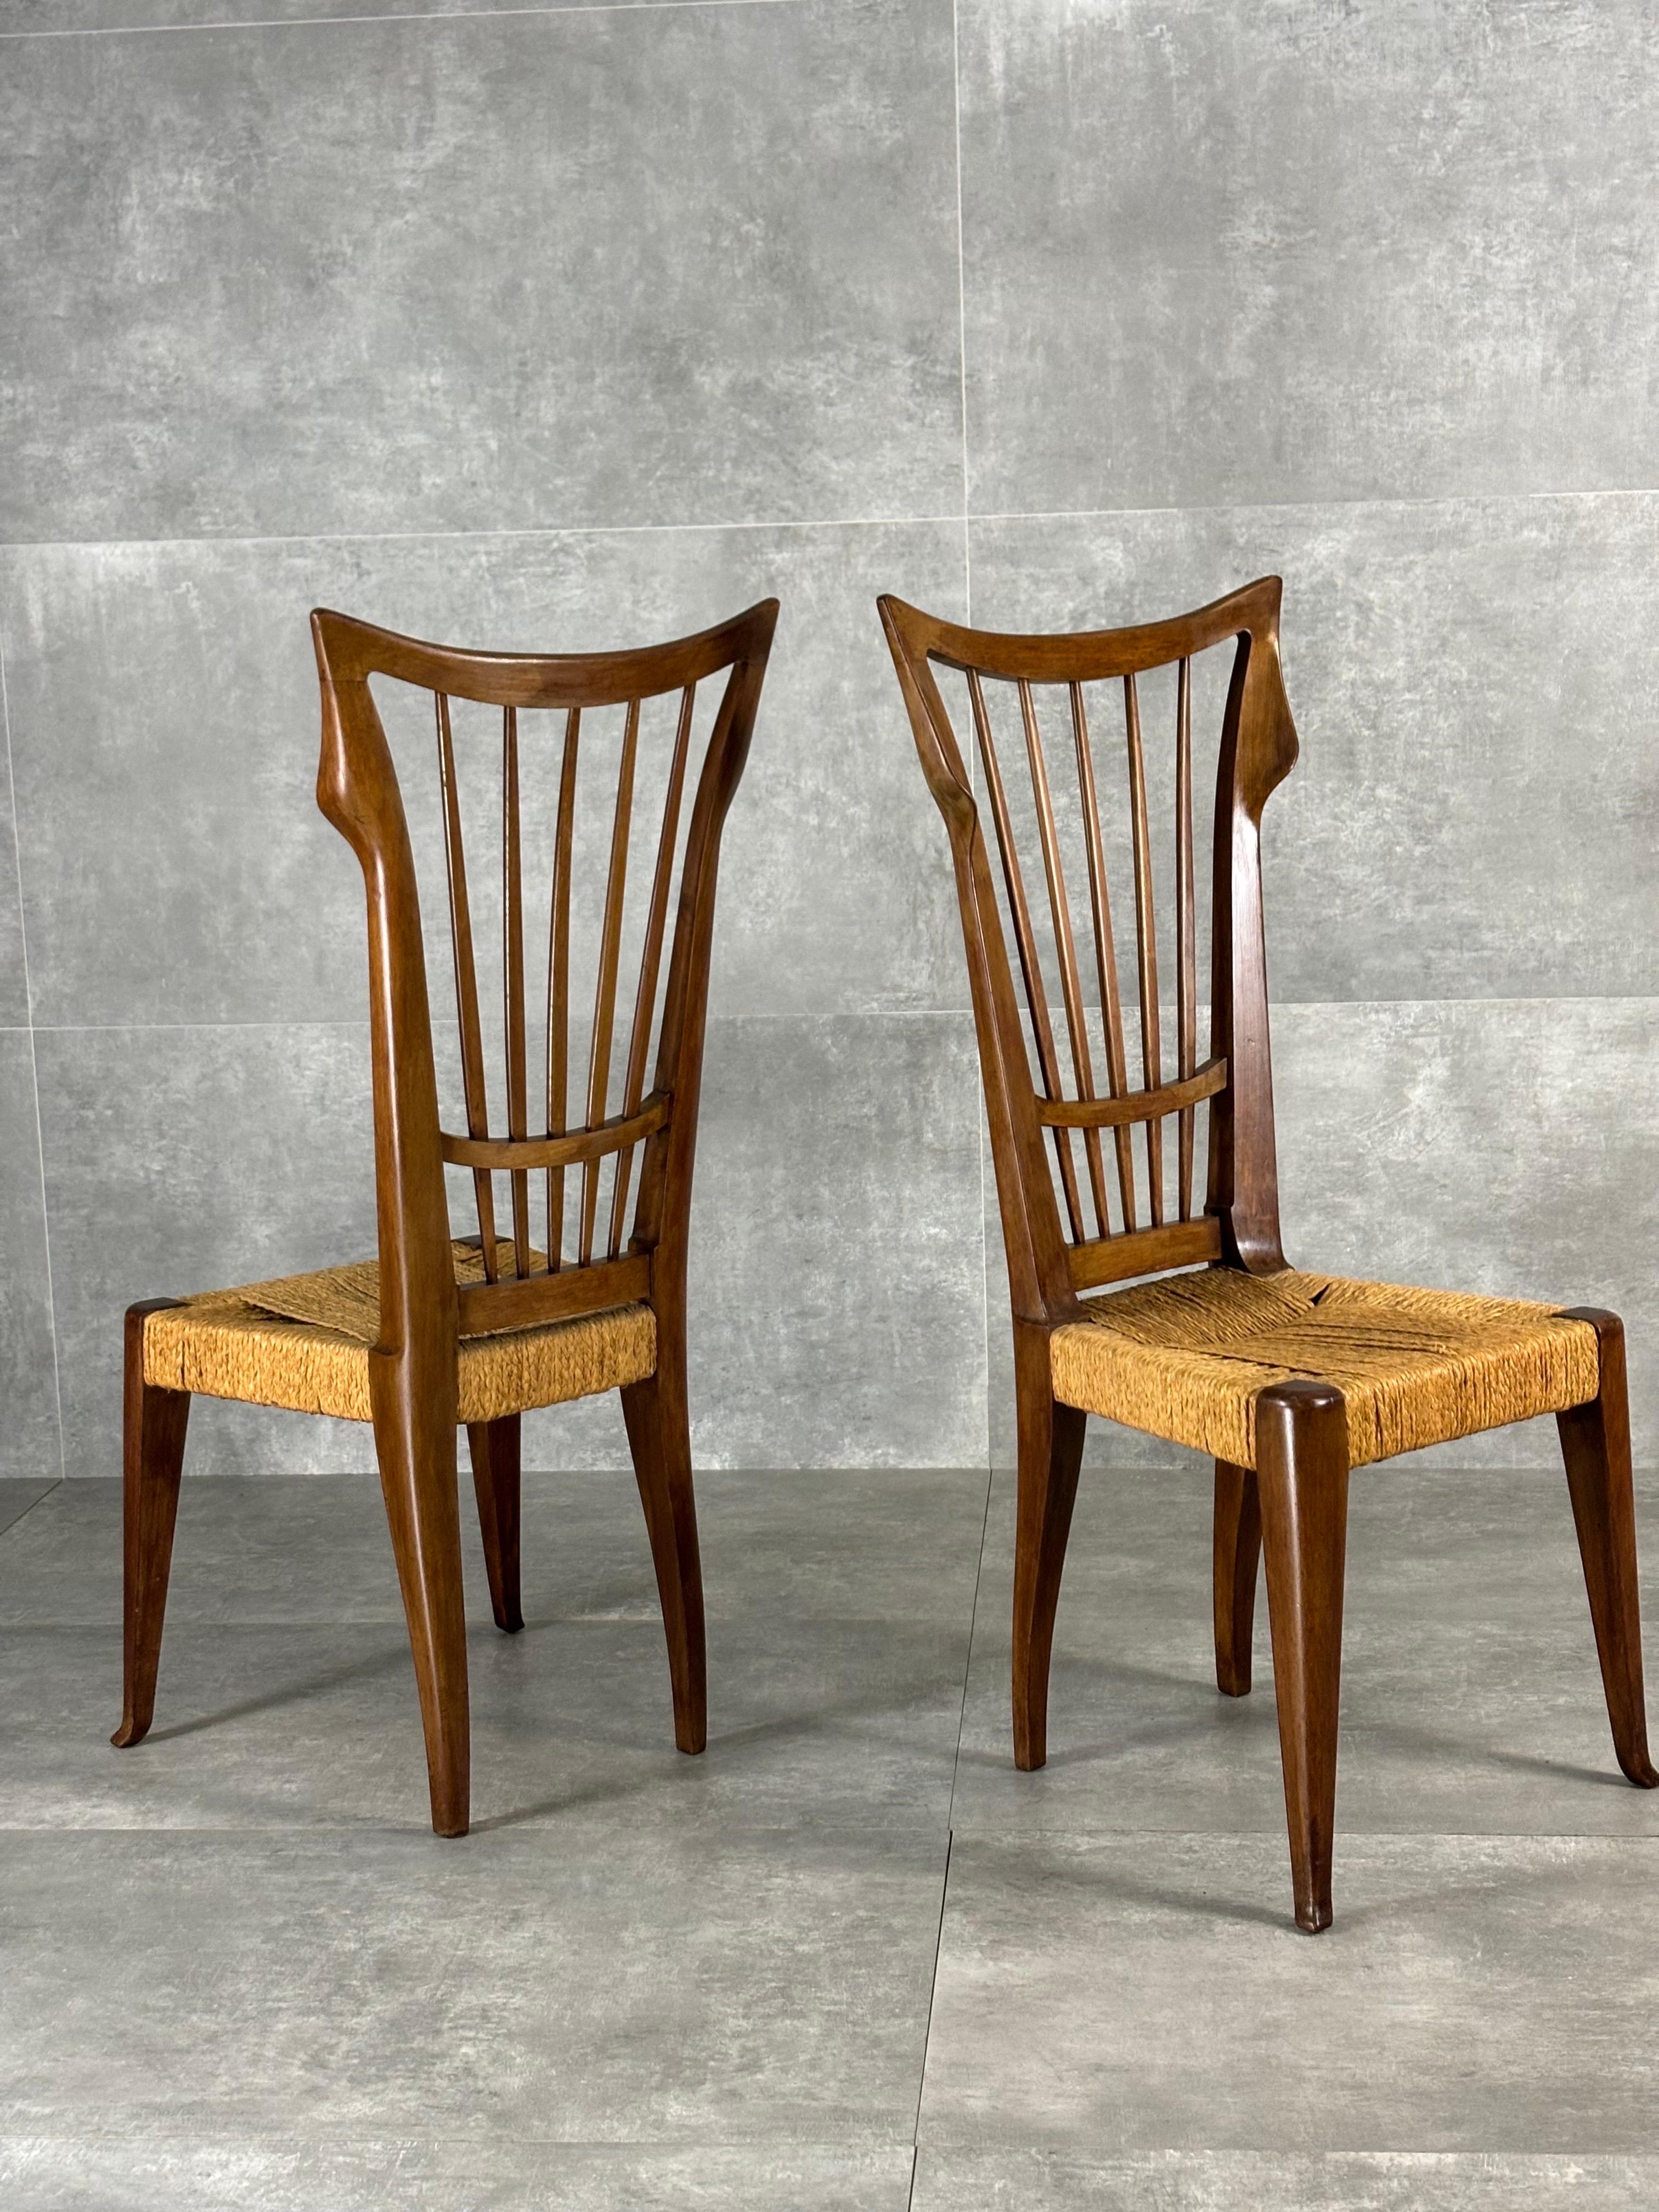 Chairs by Guglielmo Pecorini with straw seat, 1950s, set of 2 For Sale 4